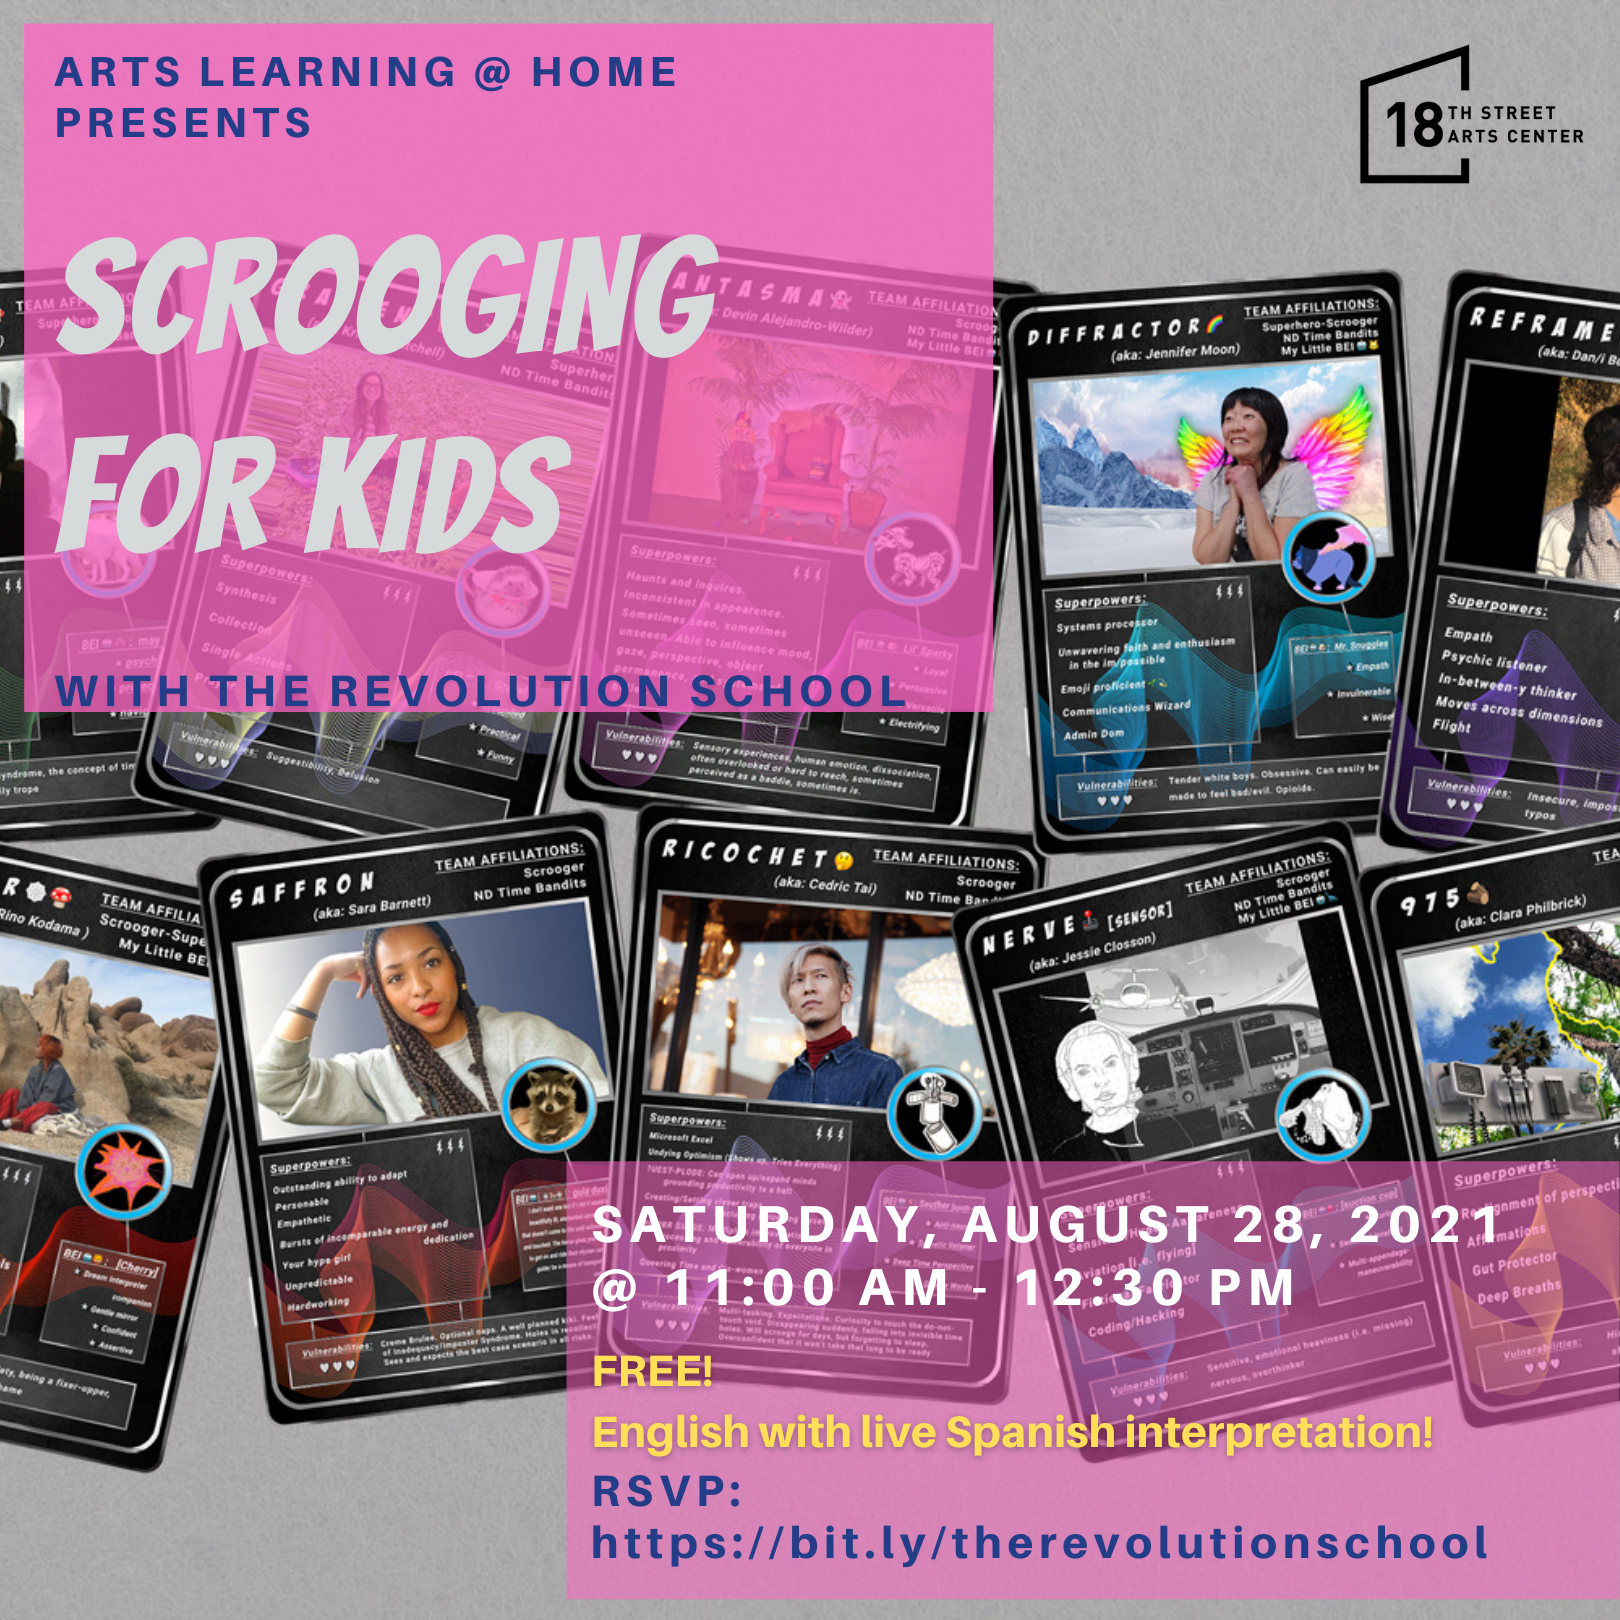 Scrooging for Kids with The Revolution School poster at 18th Street Arts Learning at Home